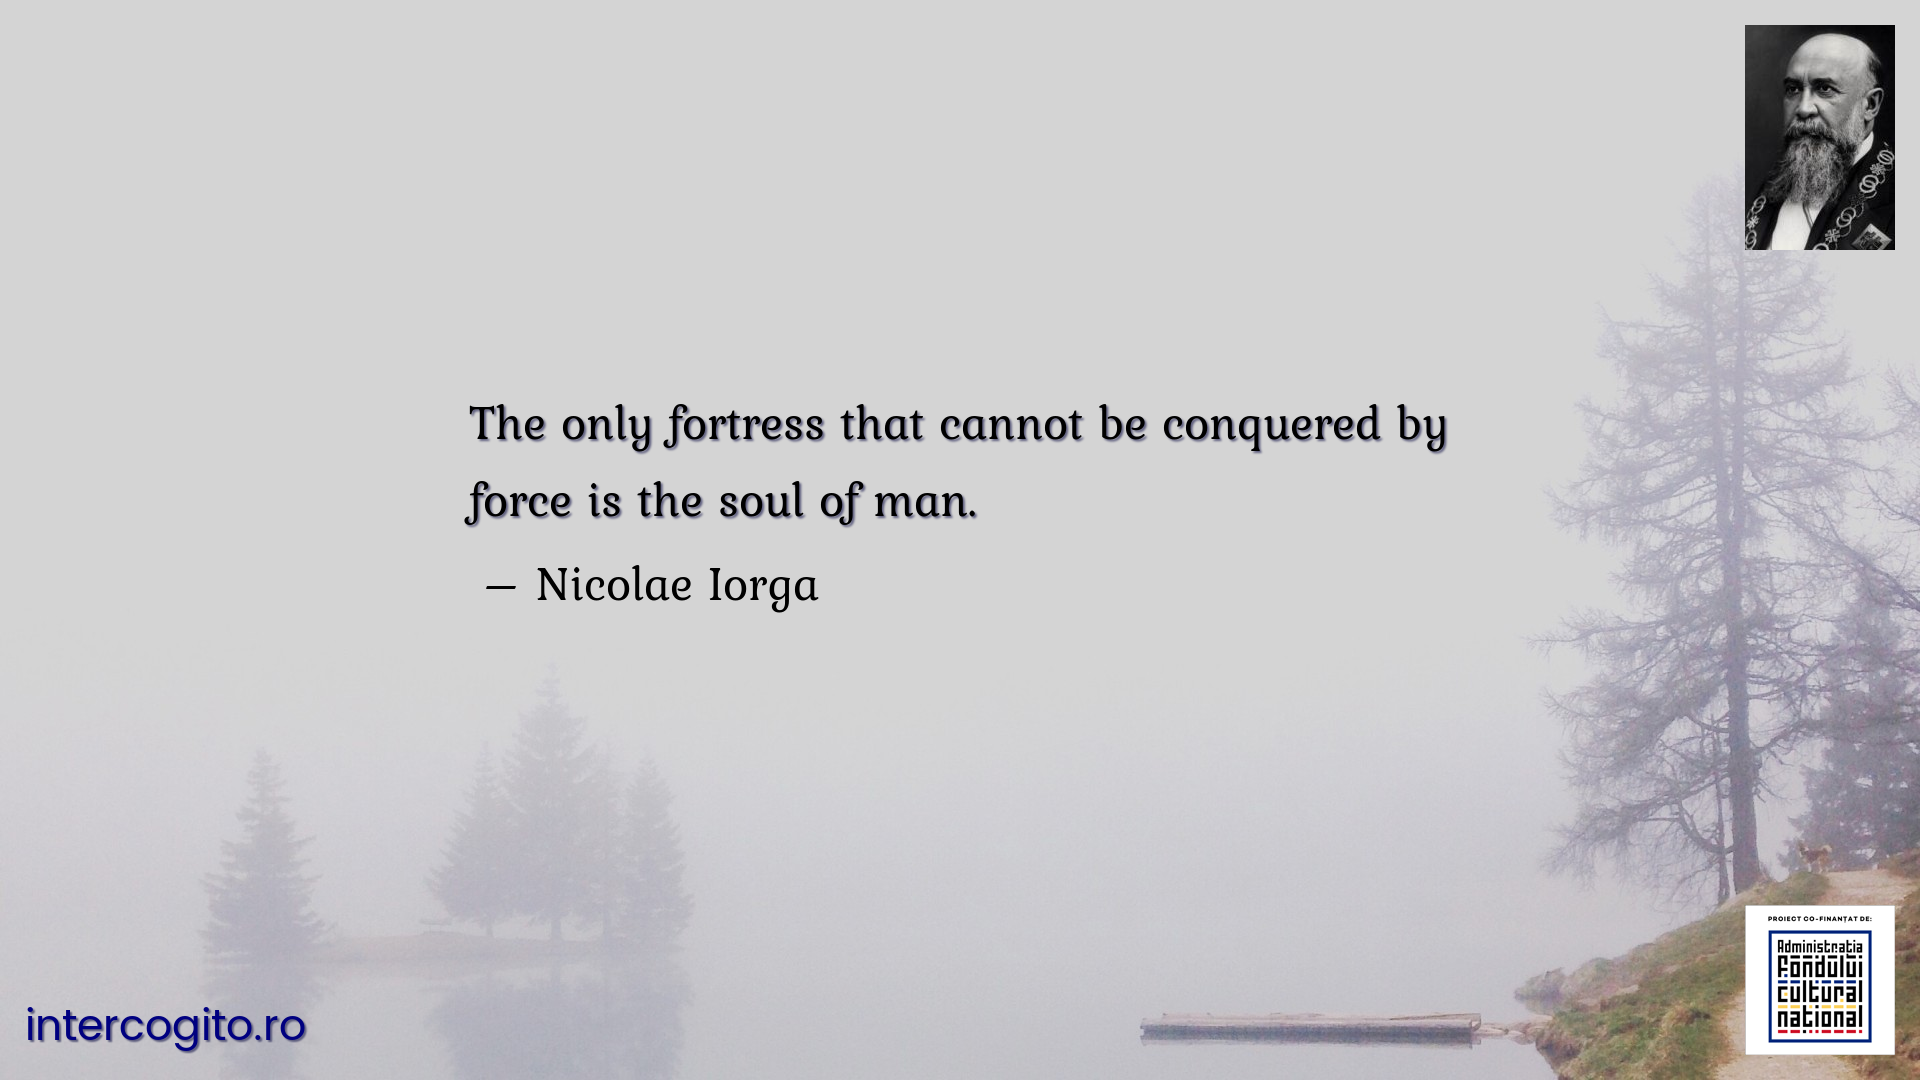 The only fortress that cannot be conquered by force is the soul of man.